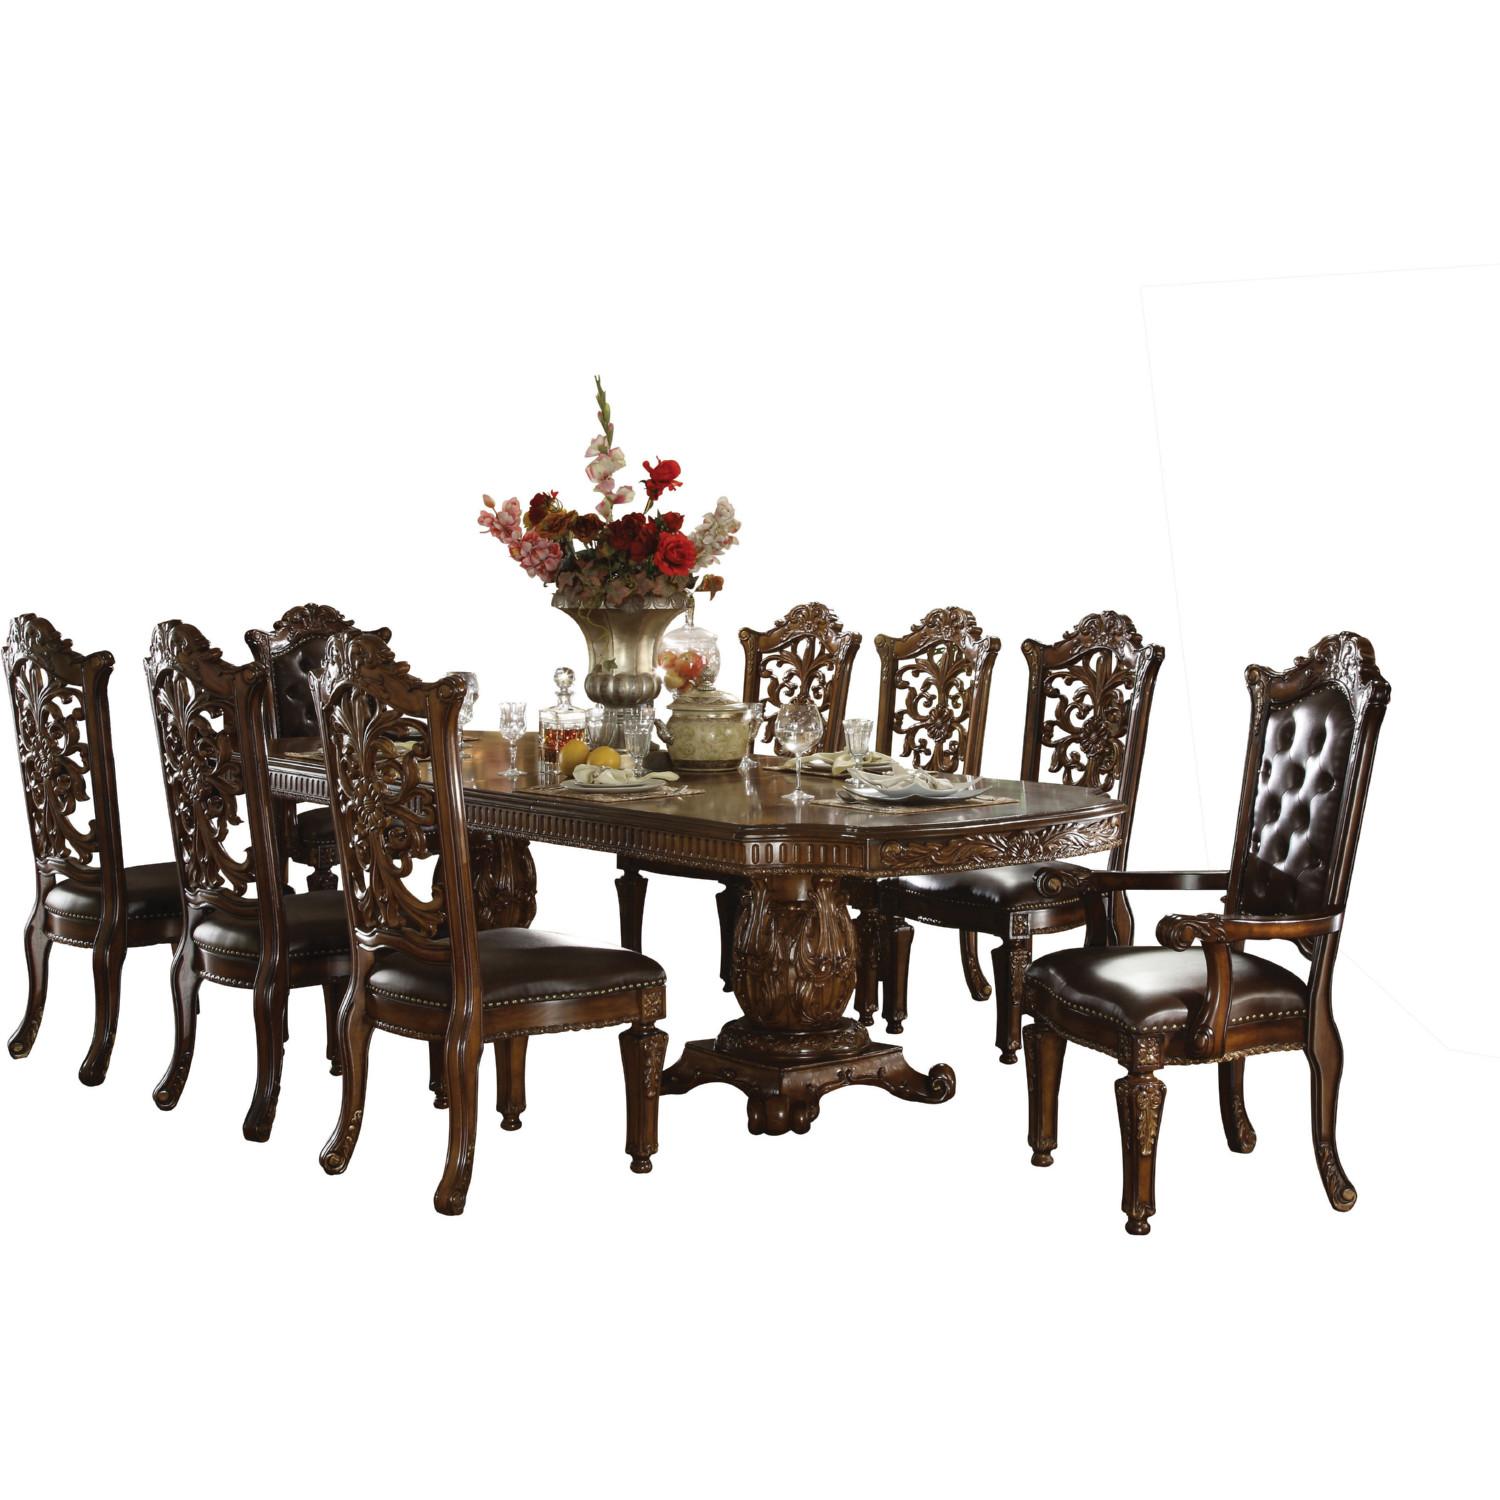 Classic, Traditional Dining Table Set Vendome 60000 60000 Vendome-Set-7 in Cherry Leather